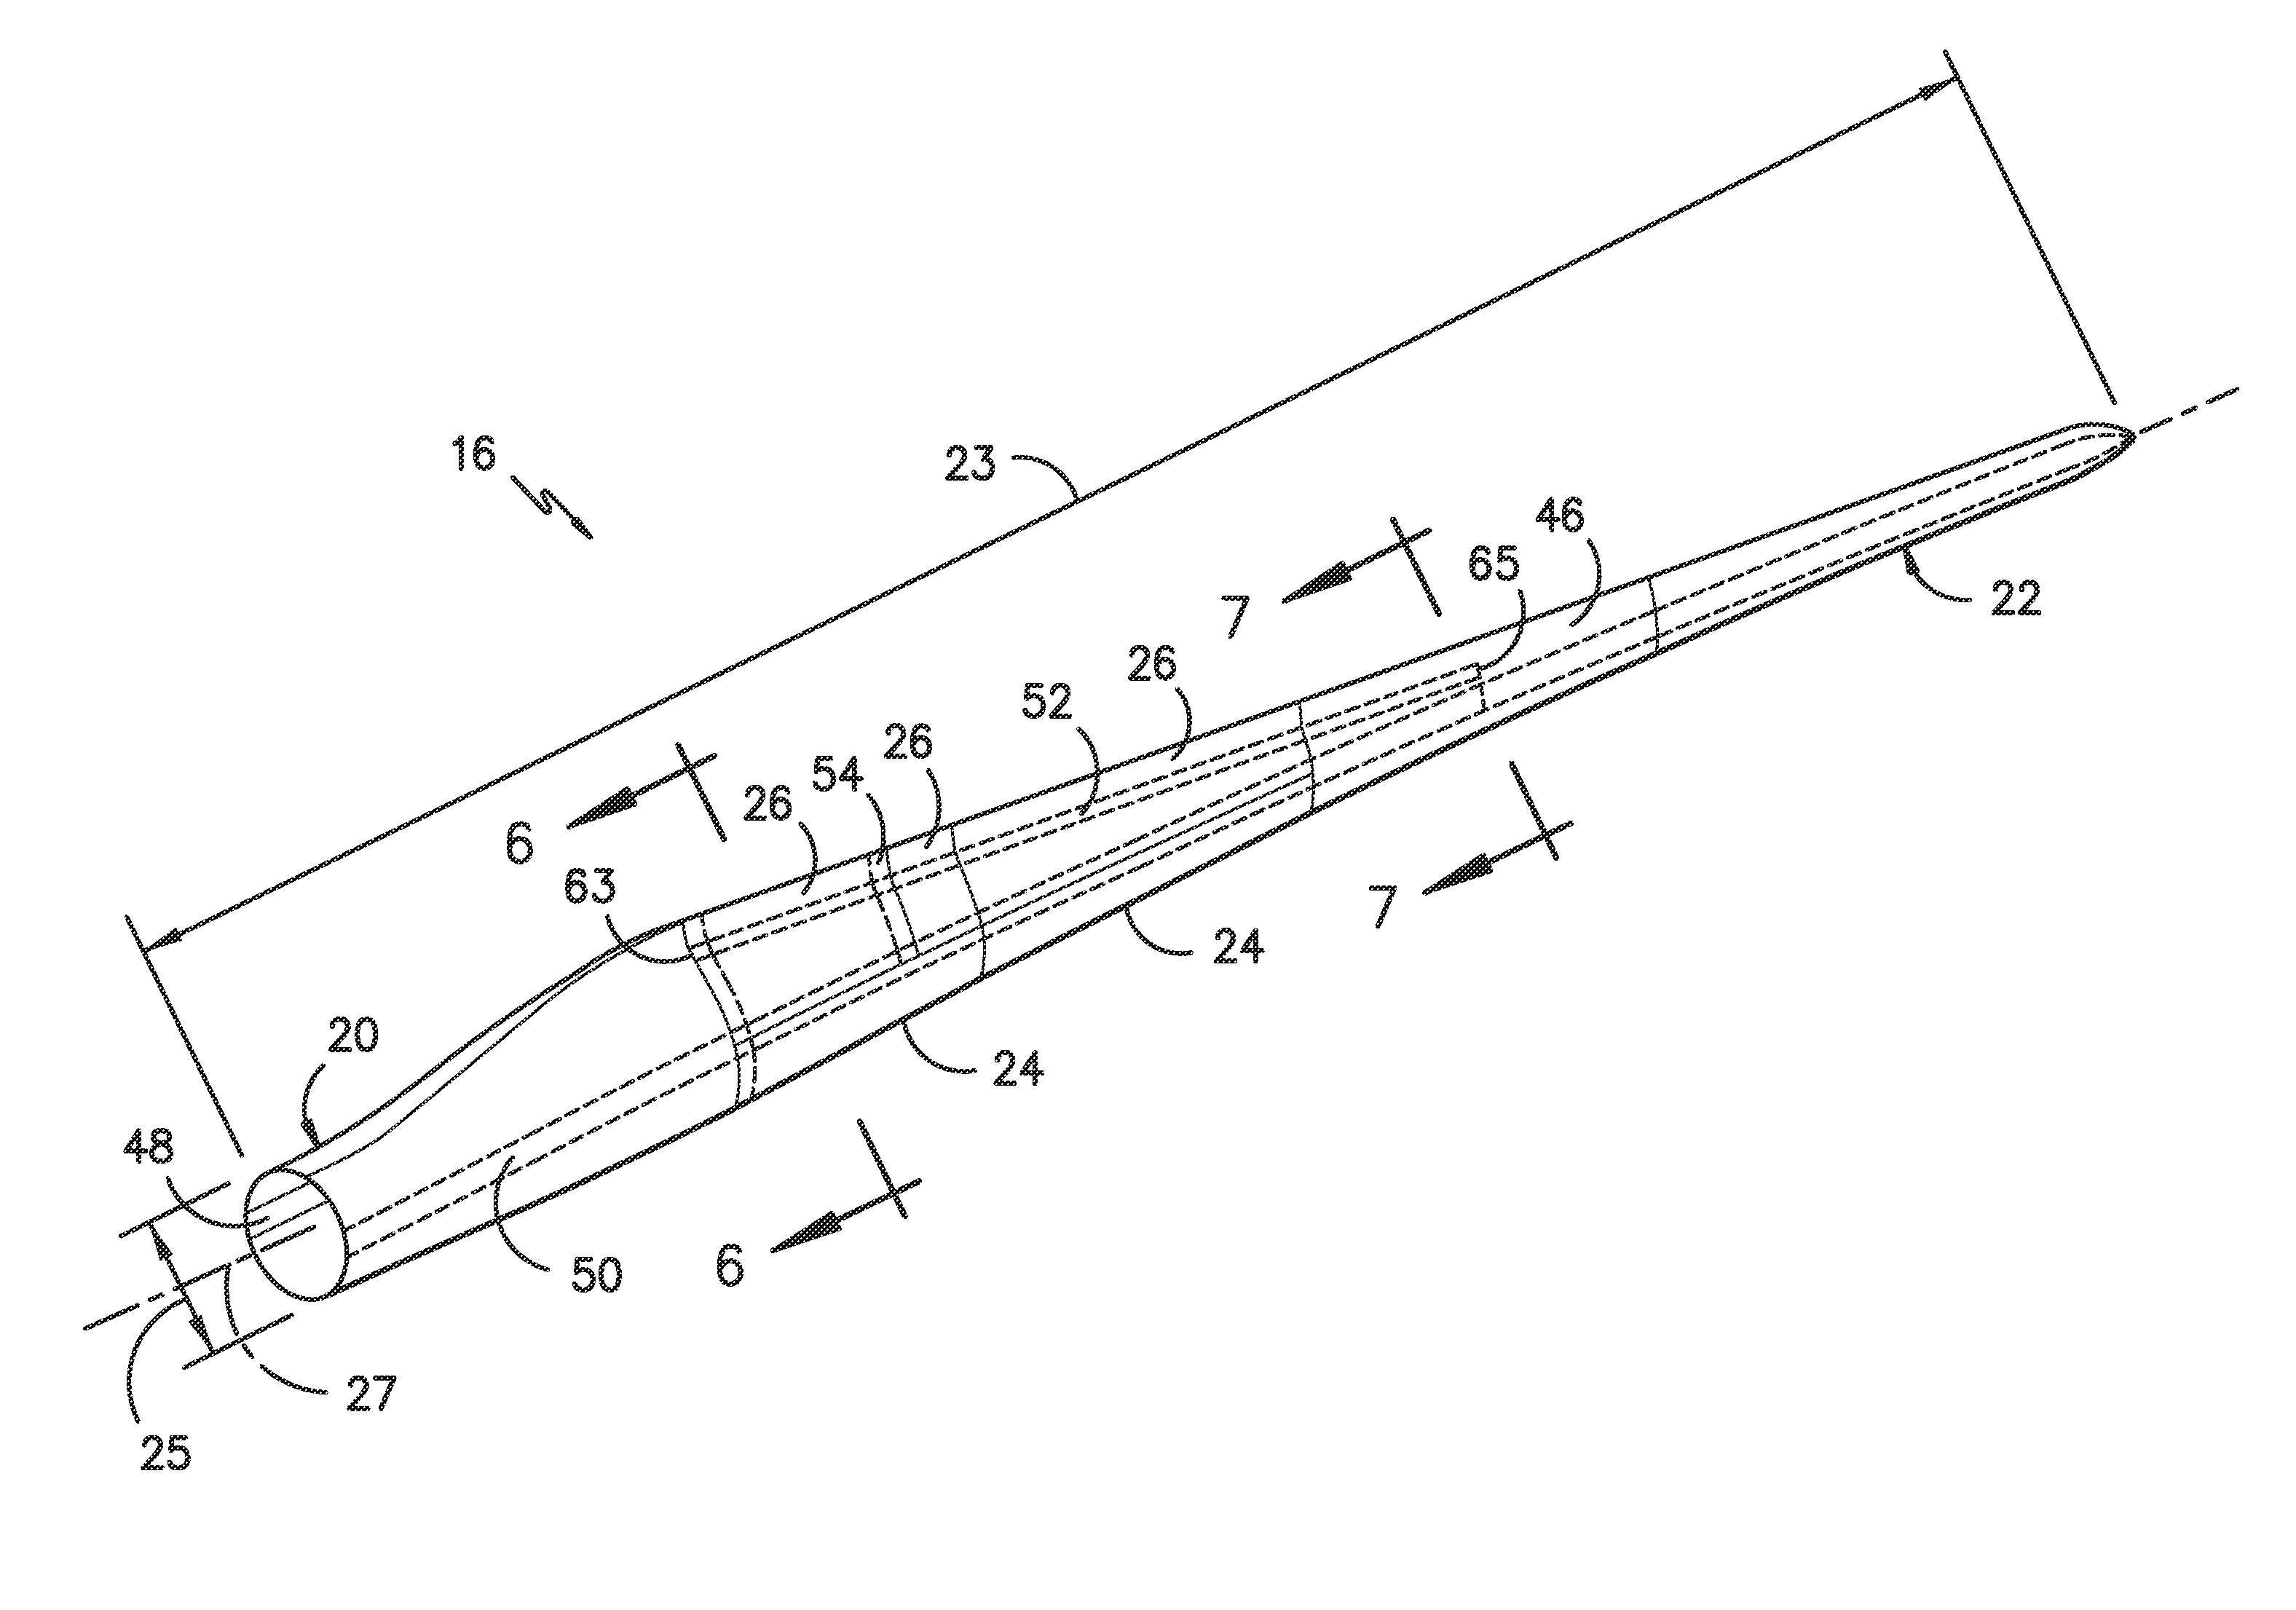 Structural component for a modular rotor blade